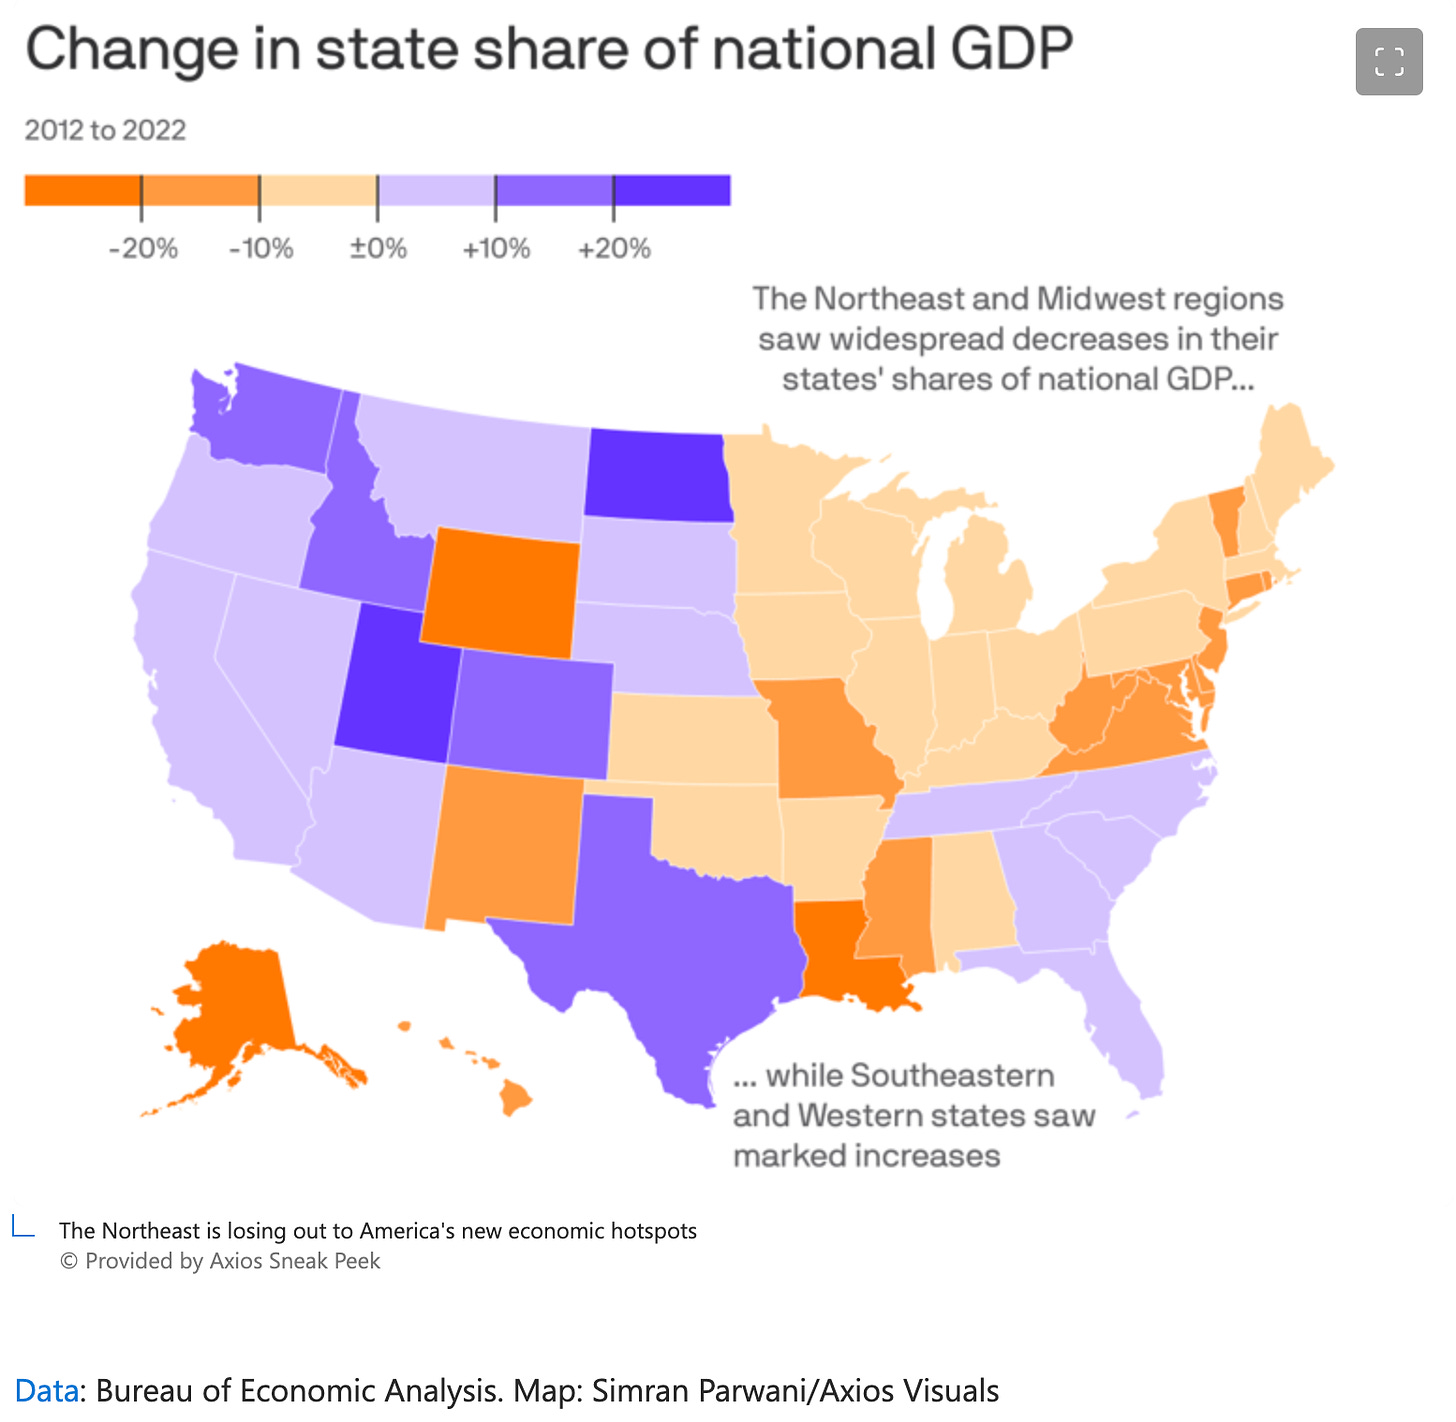 Change in state share of National GDP 2012 to 2022 (Axios Visuals)